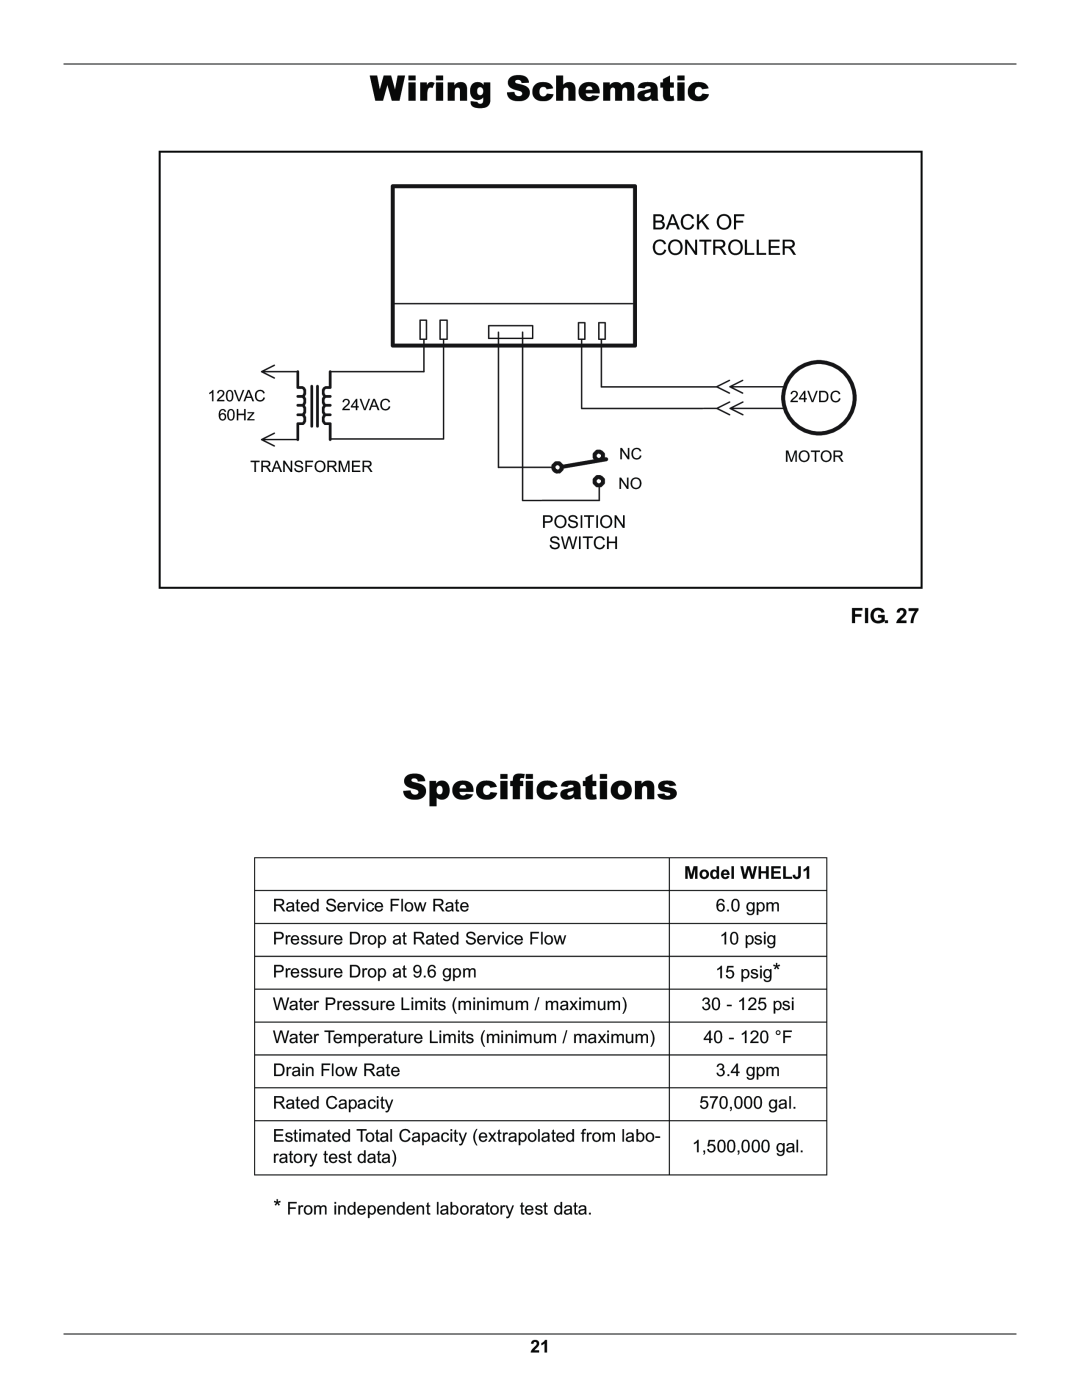 Whirlpool manual Wiring Schematic, Specifications, Model WHELJ1, Back Of Controller 